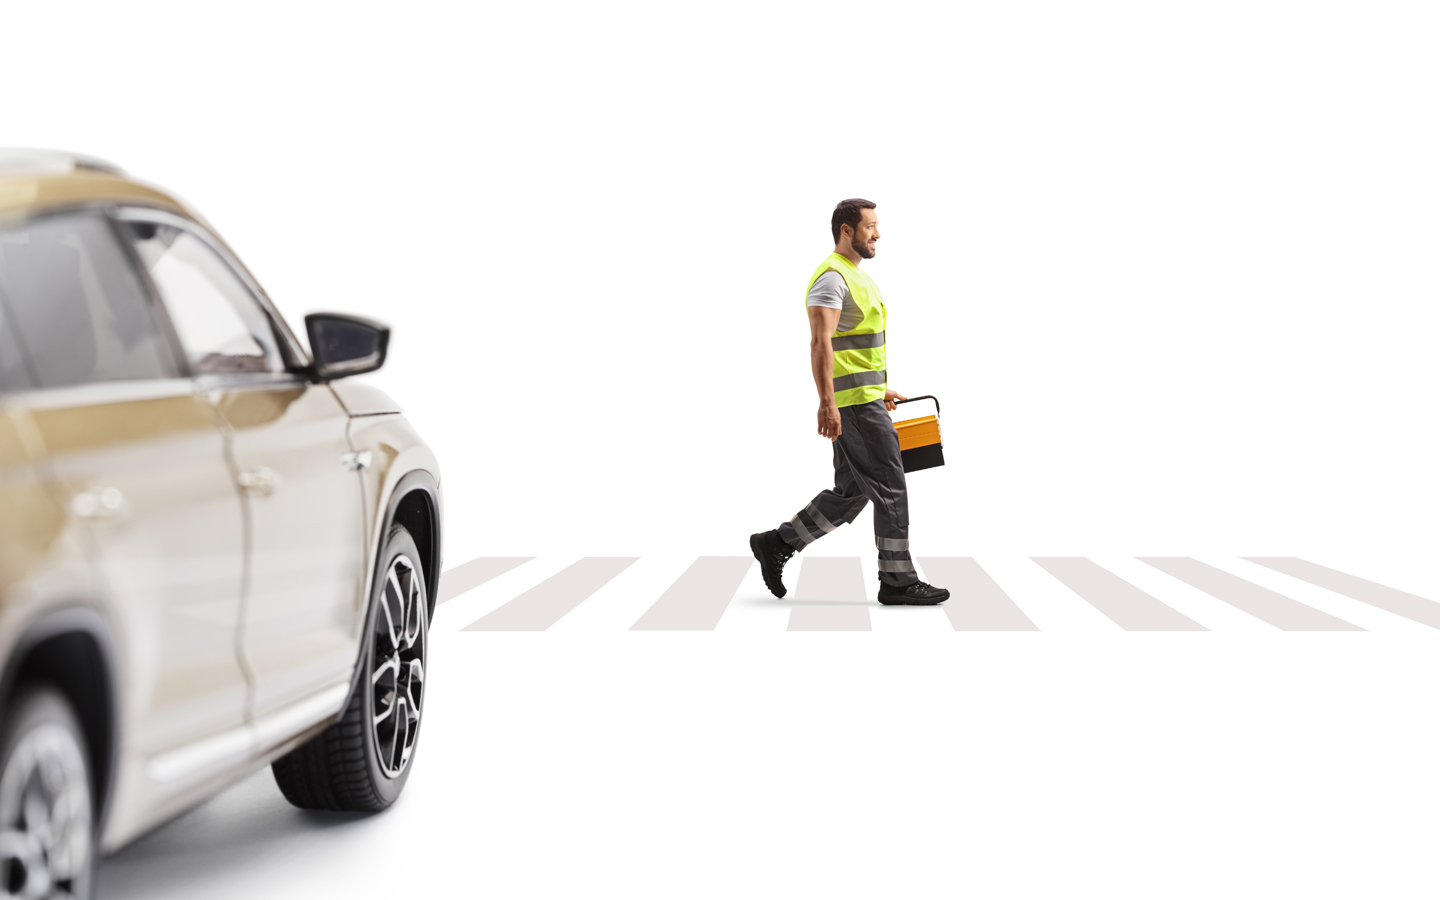 pedestrian ahead of the vehicle can be detected through different types of pedestrian detection system in cars